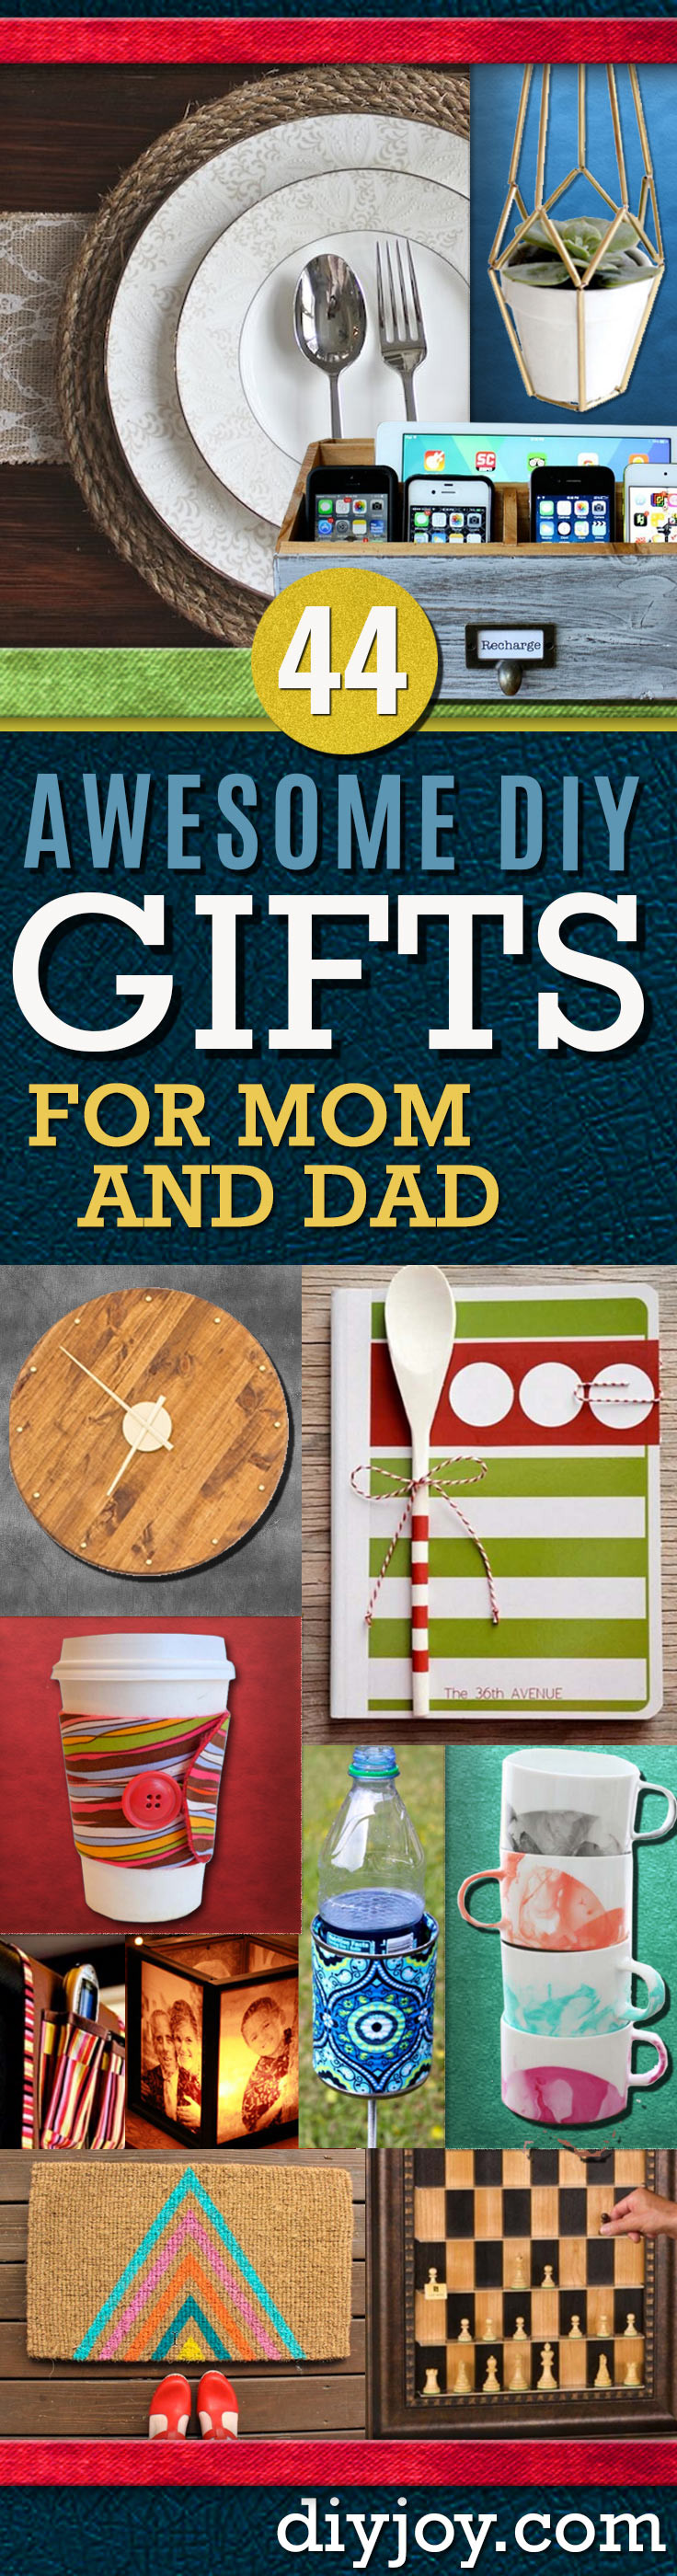 DIY Gifts For Mum Christmas
 Awesome DIY Gift Ideas Mom and Dad Will Love